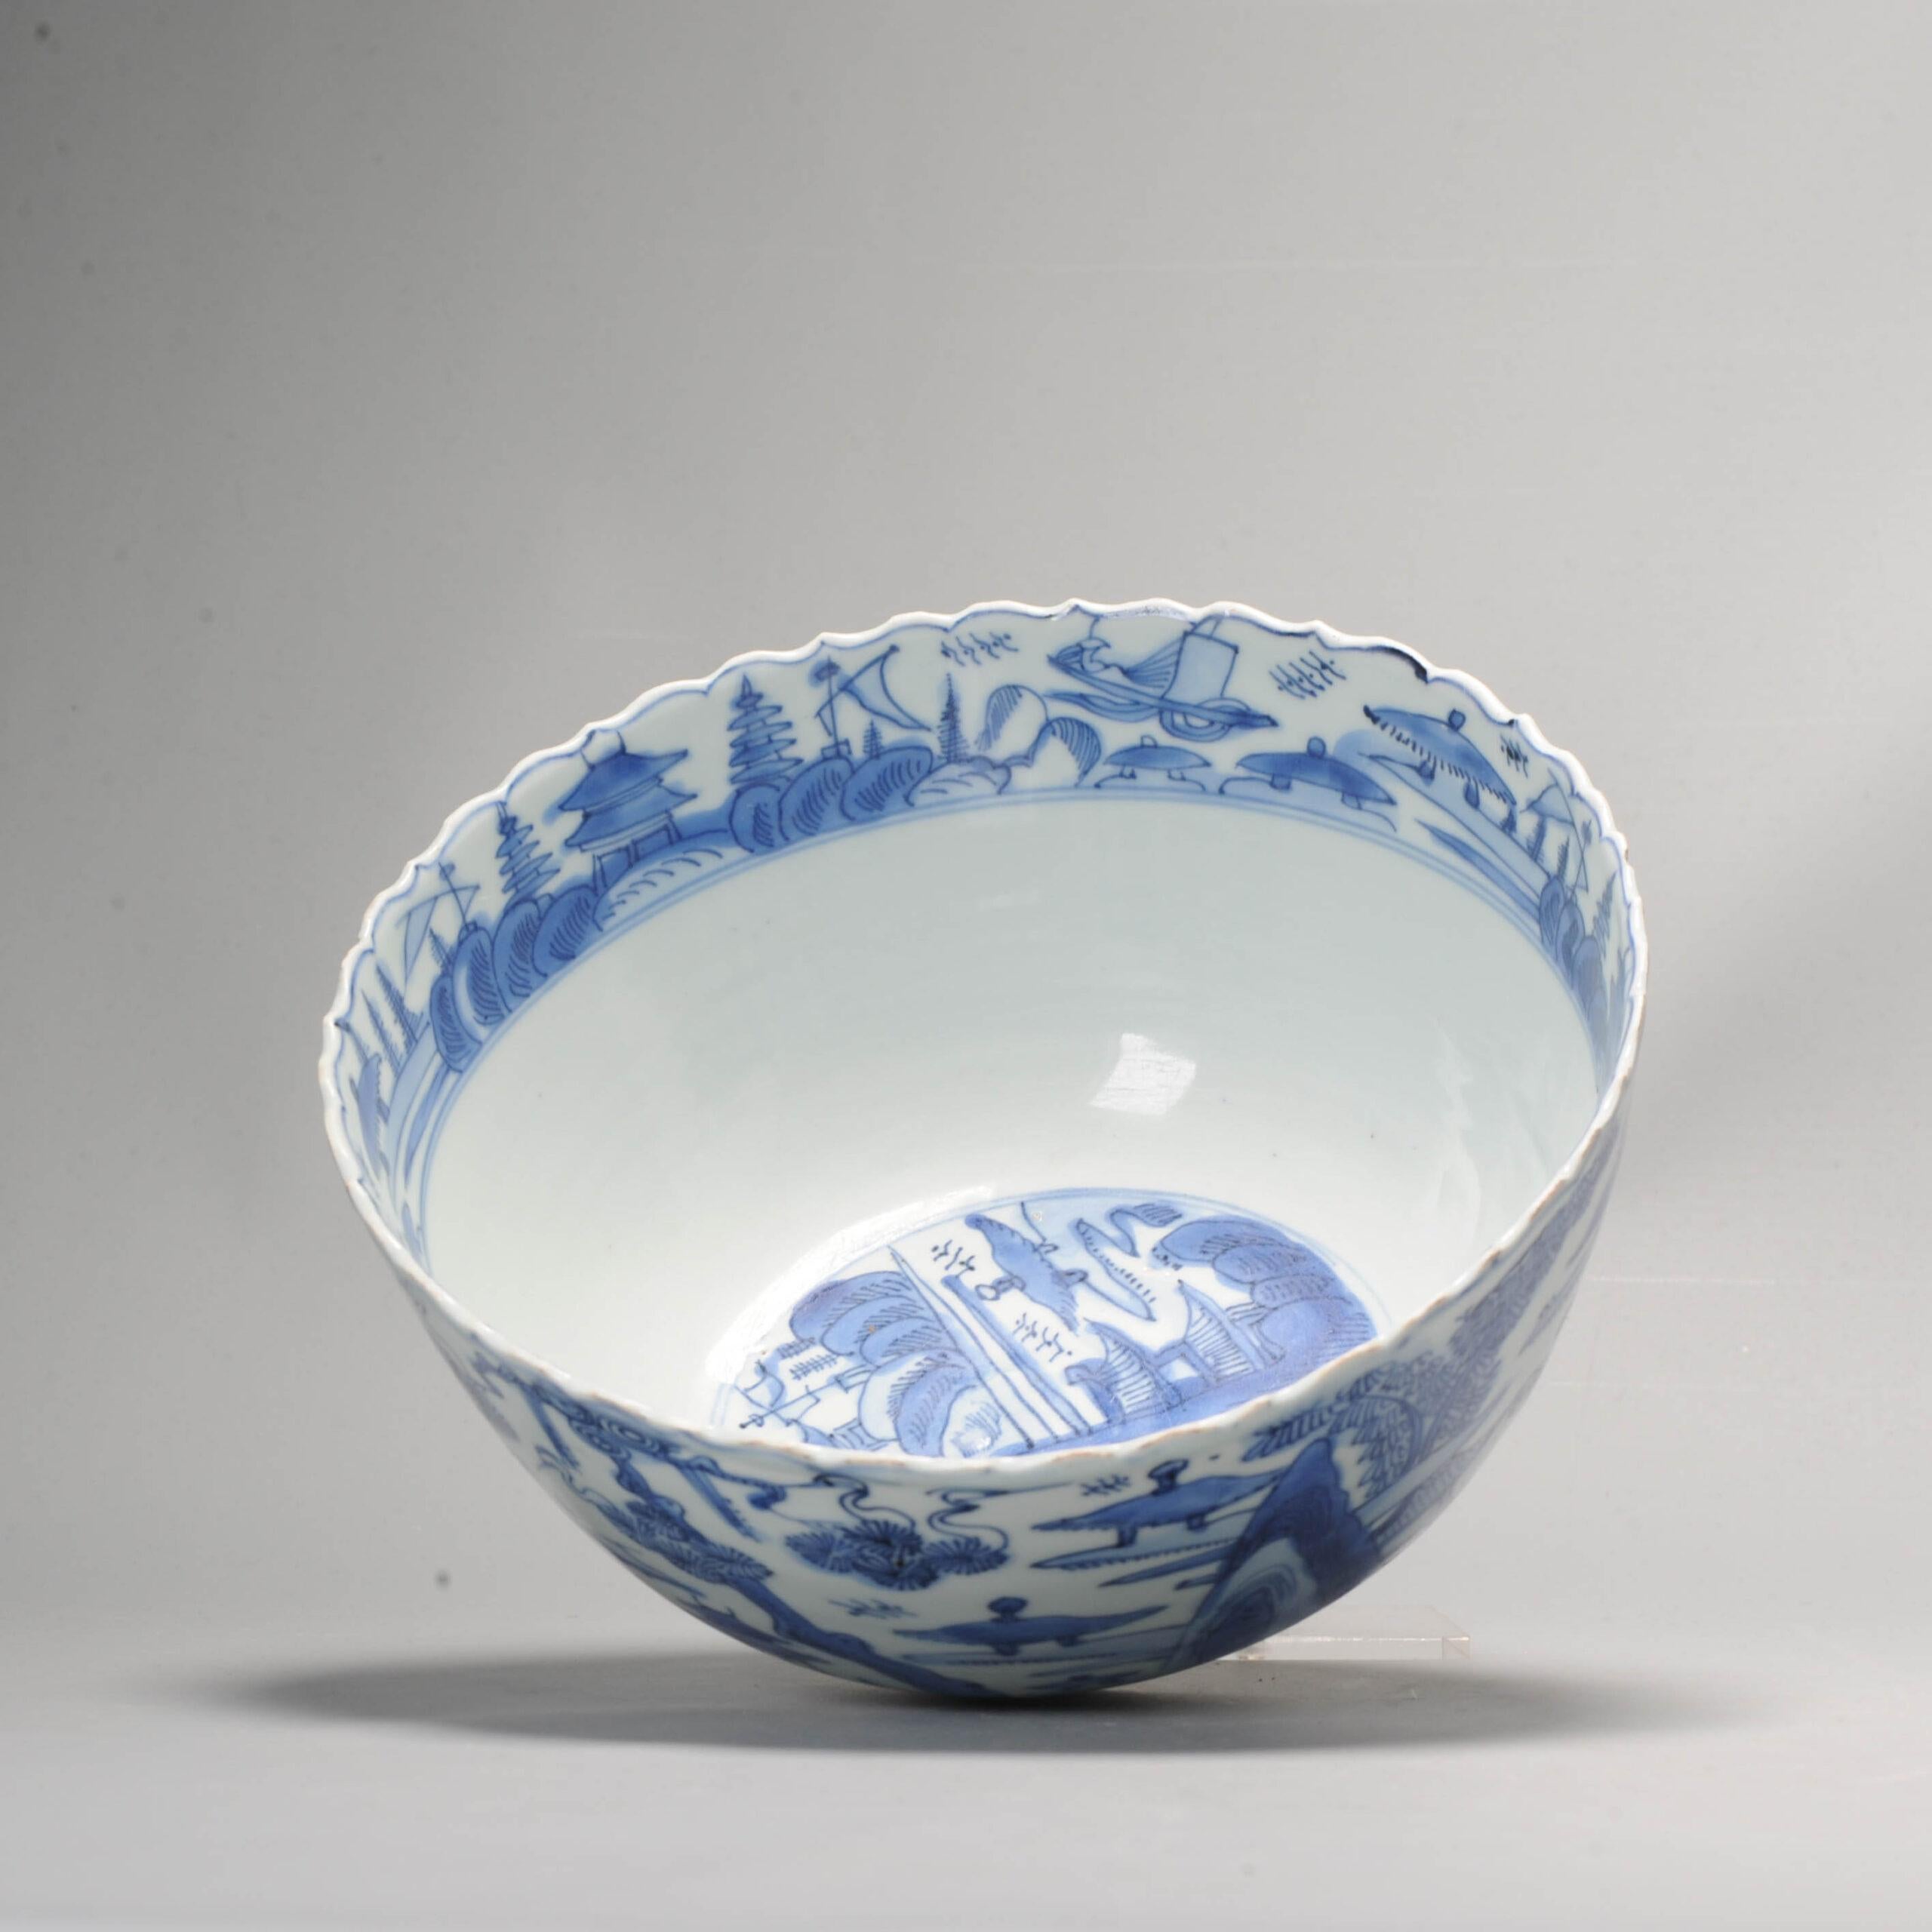 The large bowl with foliated rim from around 1600, Ming period. The bowl is decorated with a continuous river landscape scene with pagodas, pavilions, boats and cranes in a pine tree. The interior rim and interior central roundel are similarly